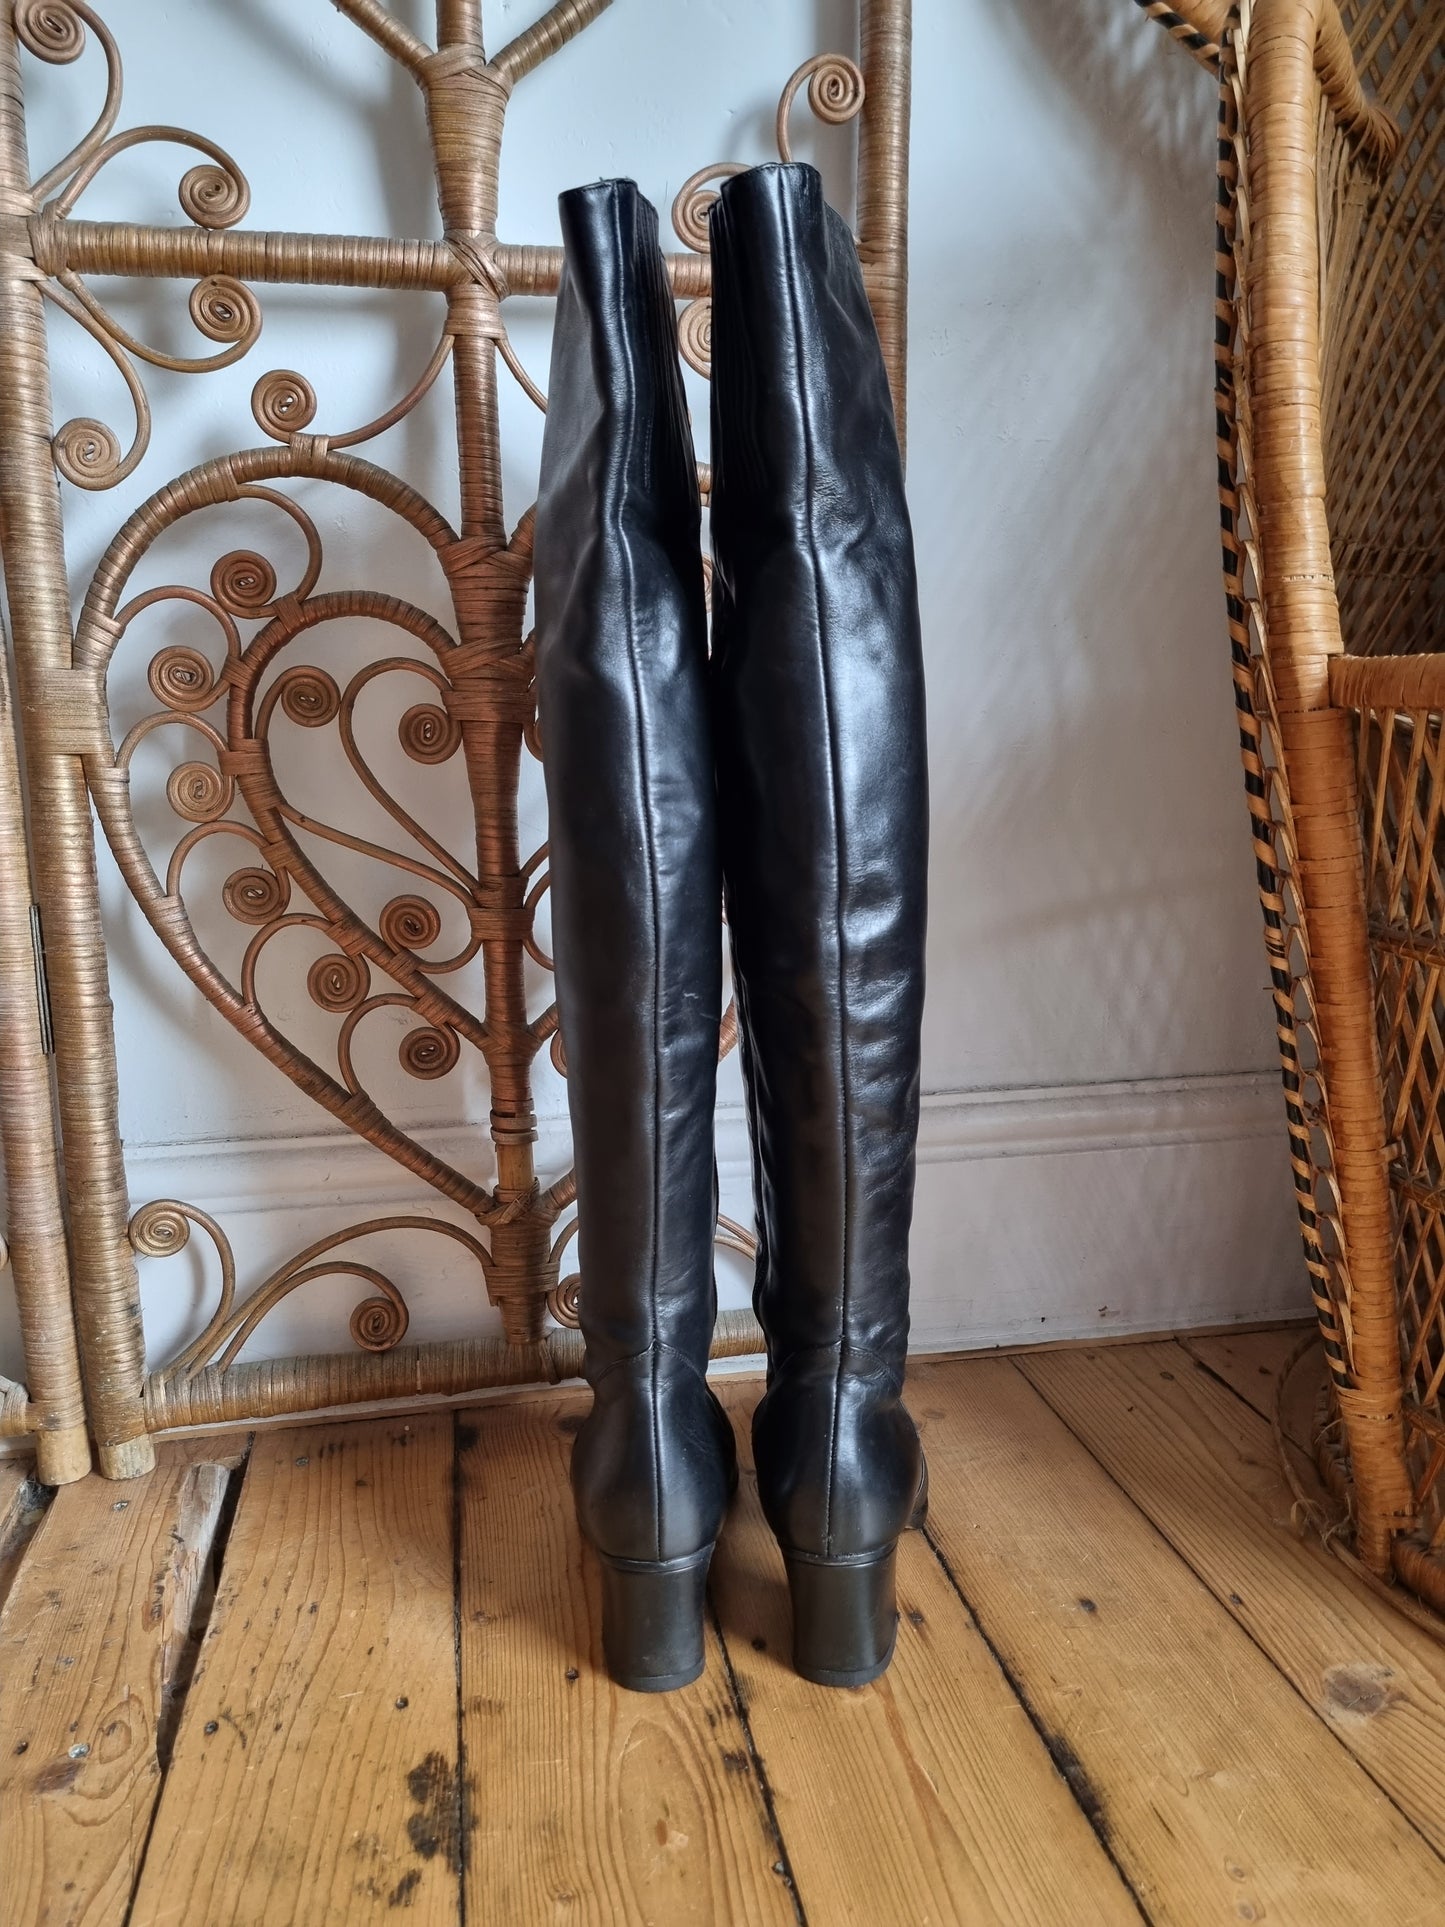 Vintage black Bally over the knee leather boots uk size 4 4.5 Eur 37 37.5 us 6 6.5